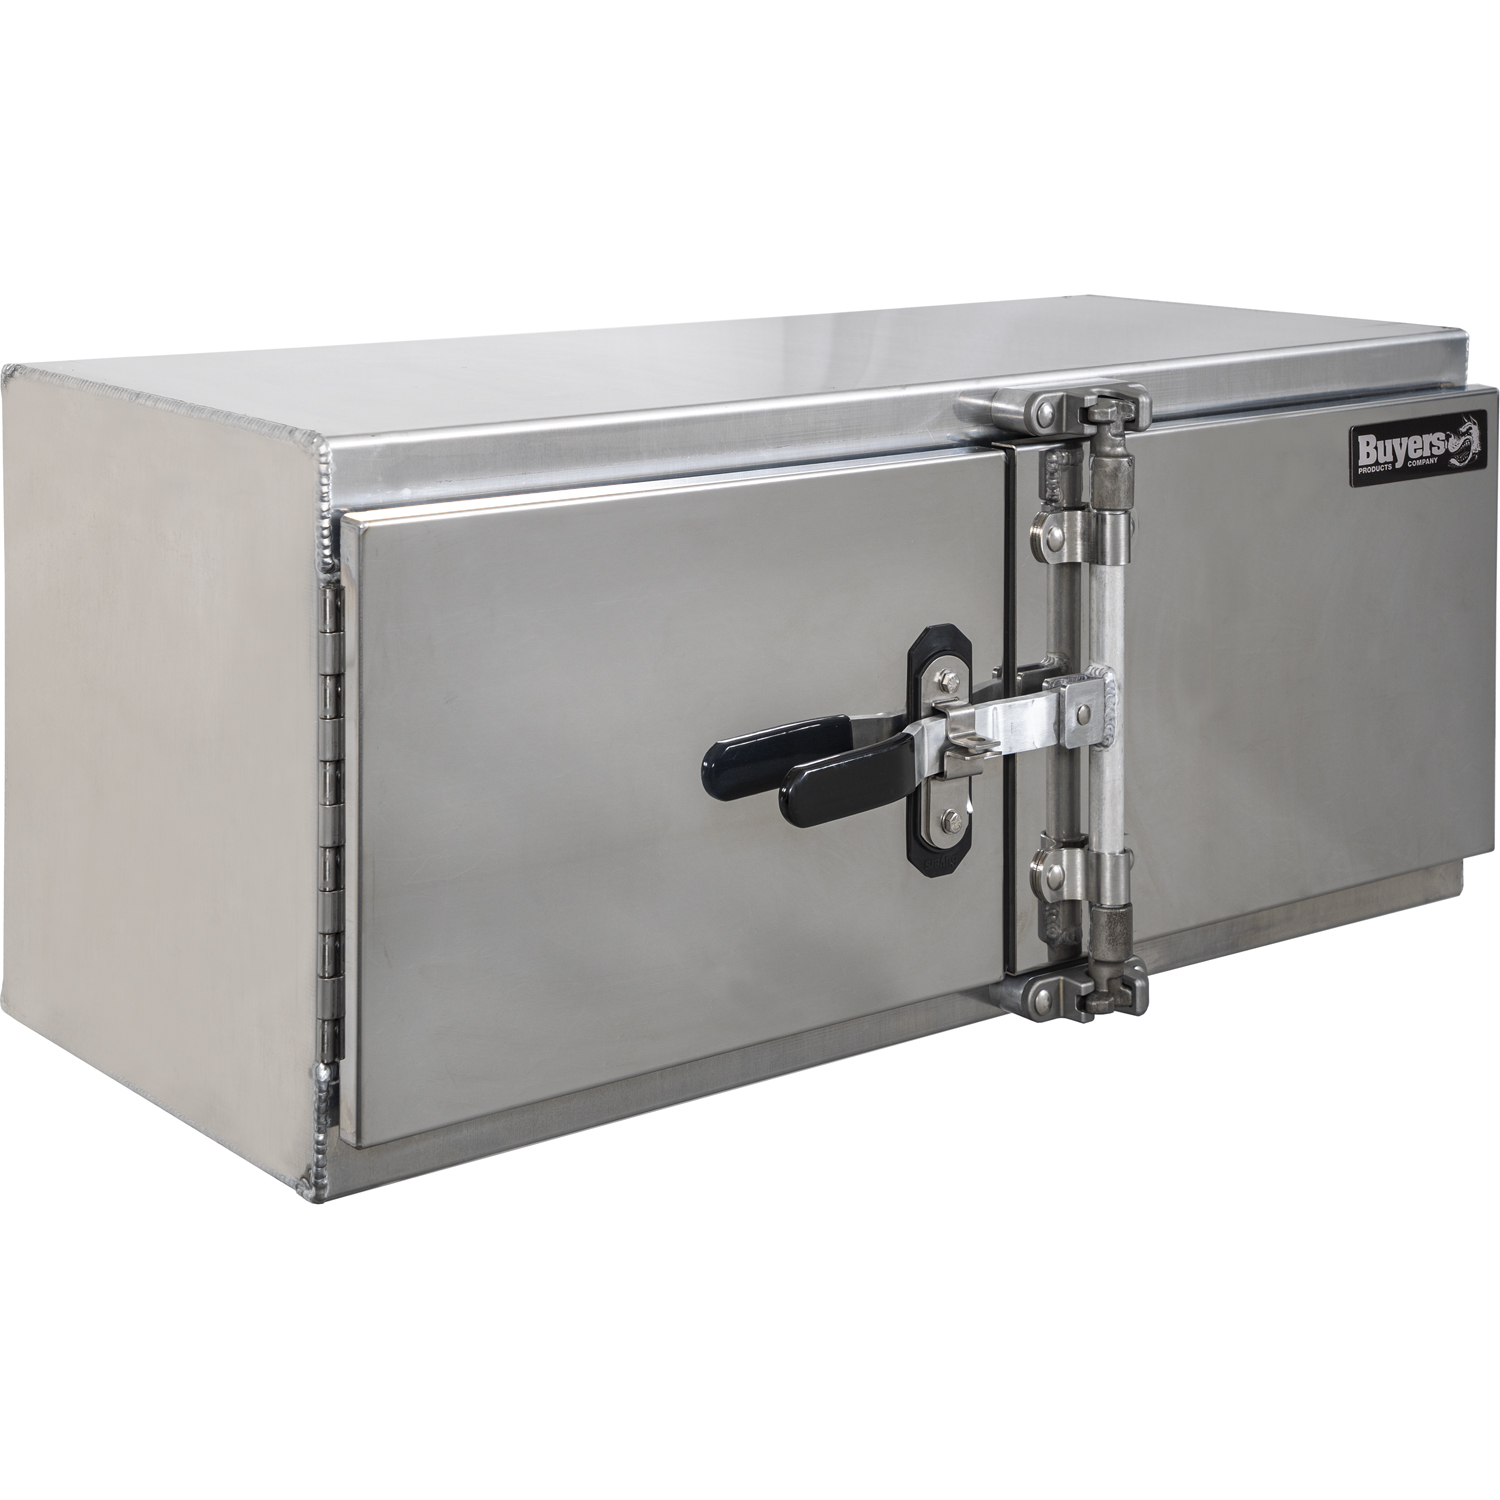 BUYERS PRODUCTS Aluminum Camlock Truck Tool Boxes